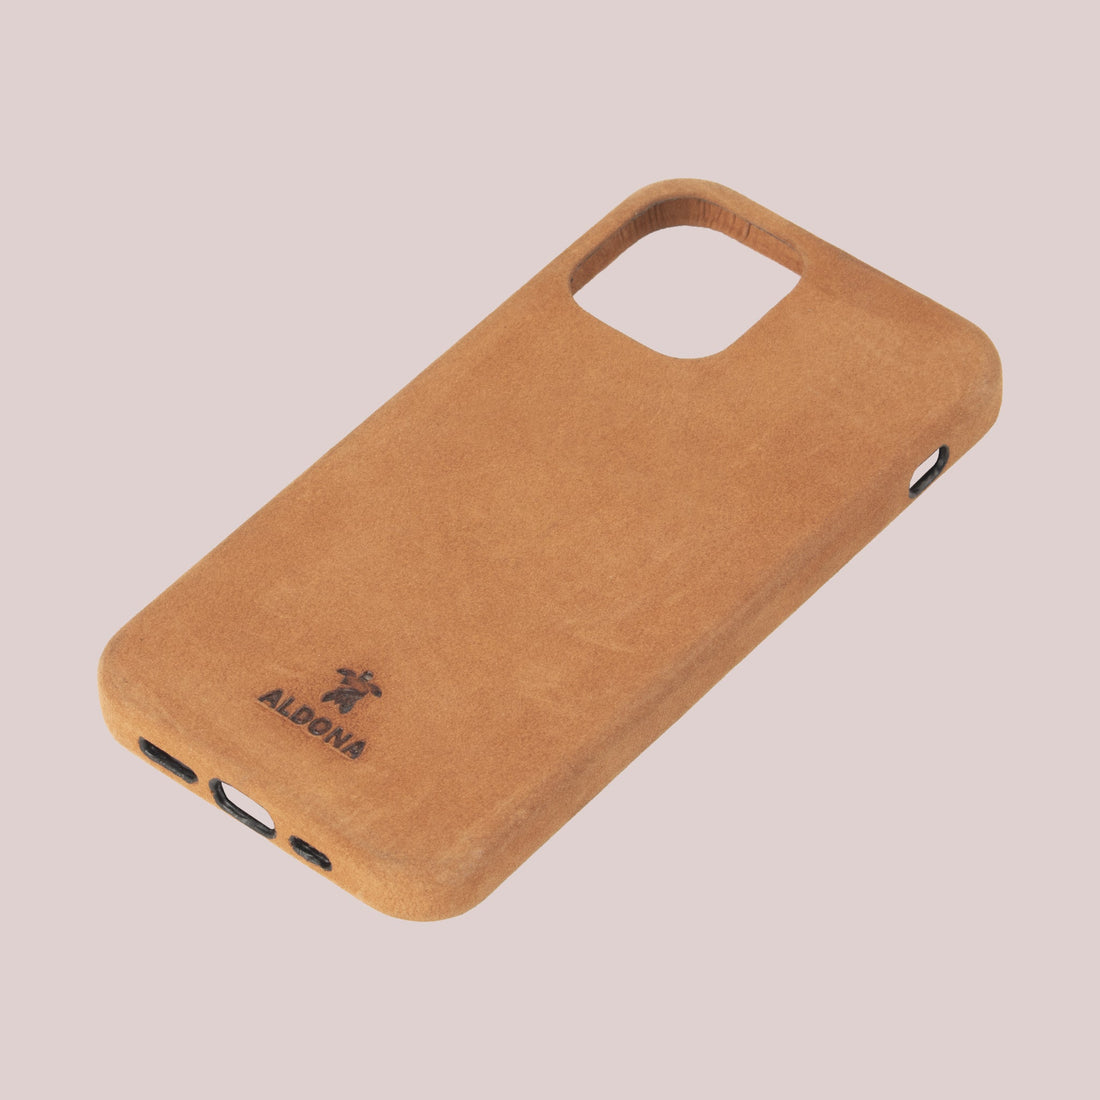 Kalon Case for iPhone 13 with MagSafe Compatibility - Burnt Tobacco